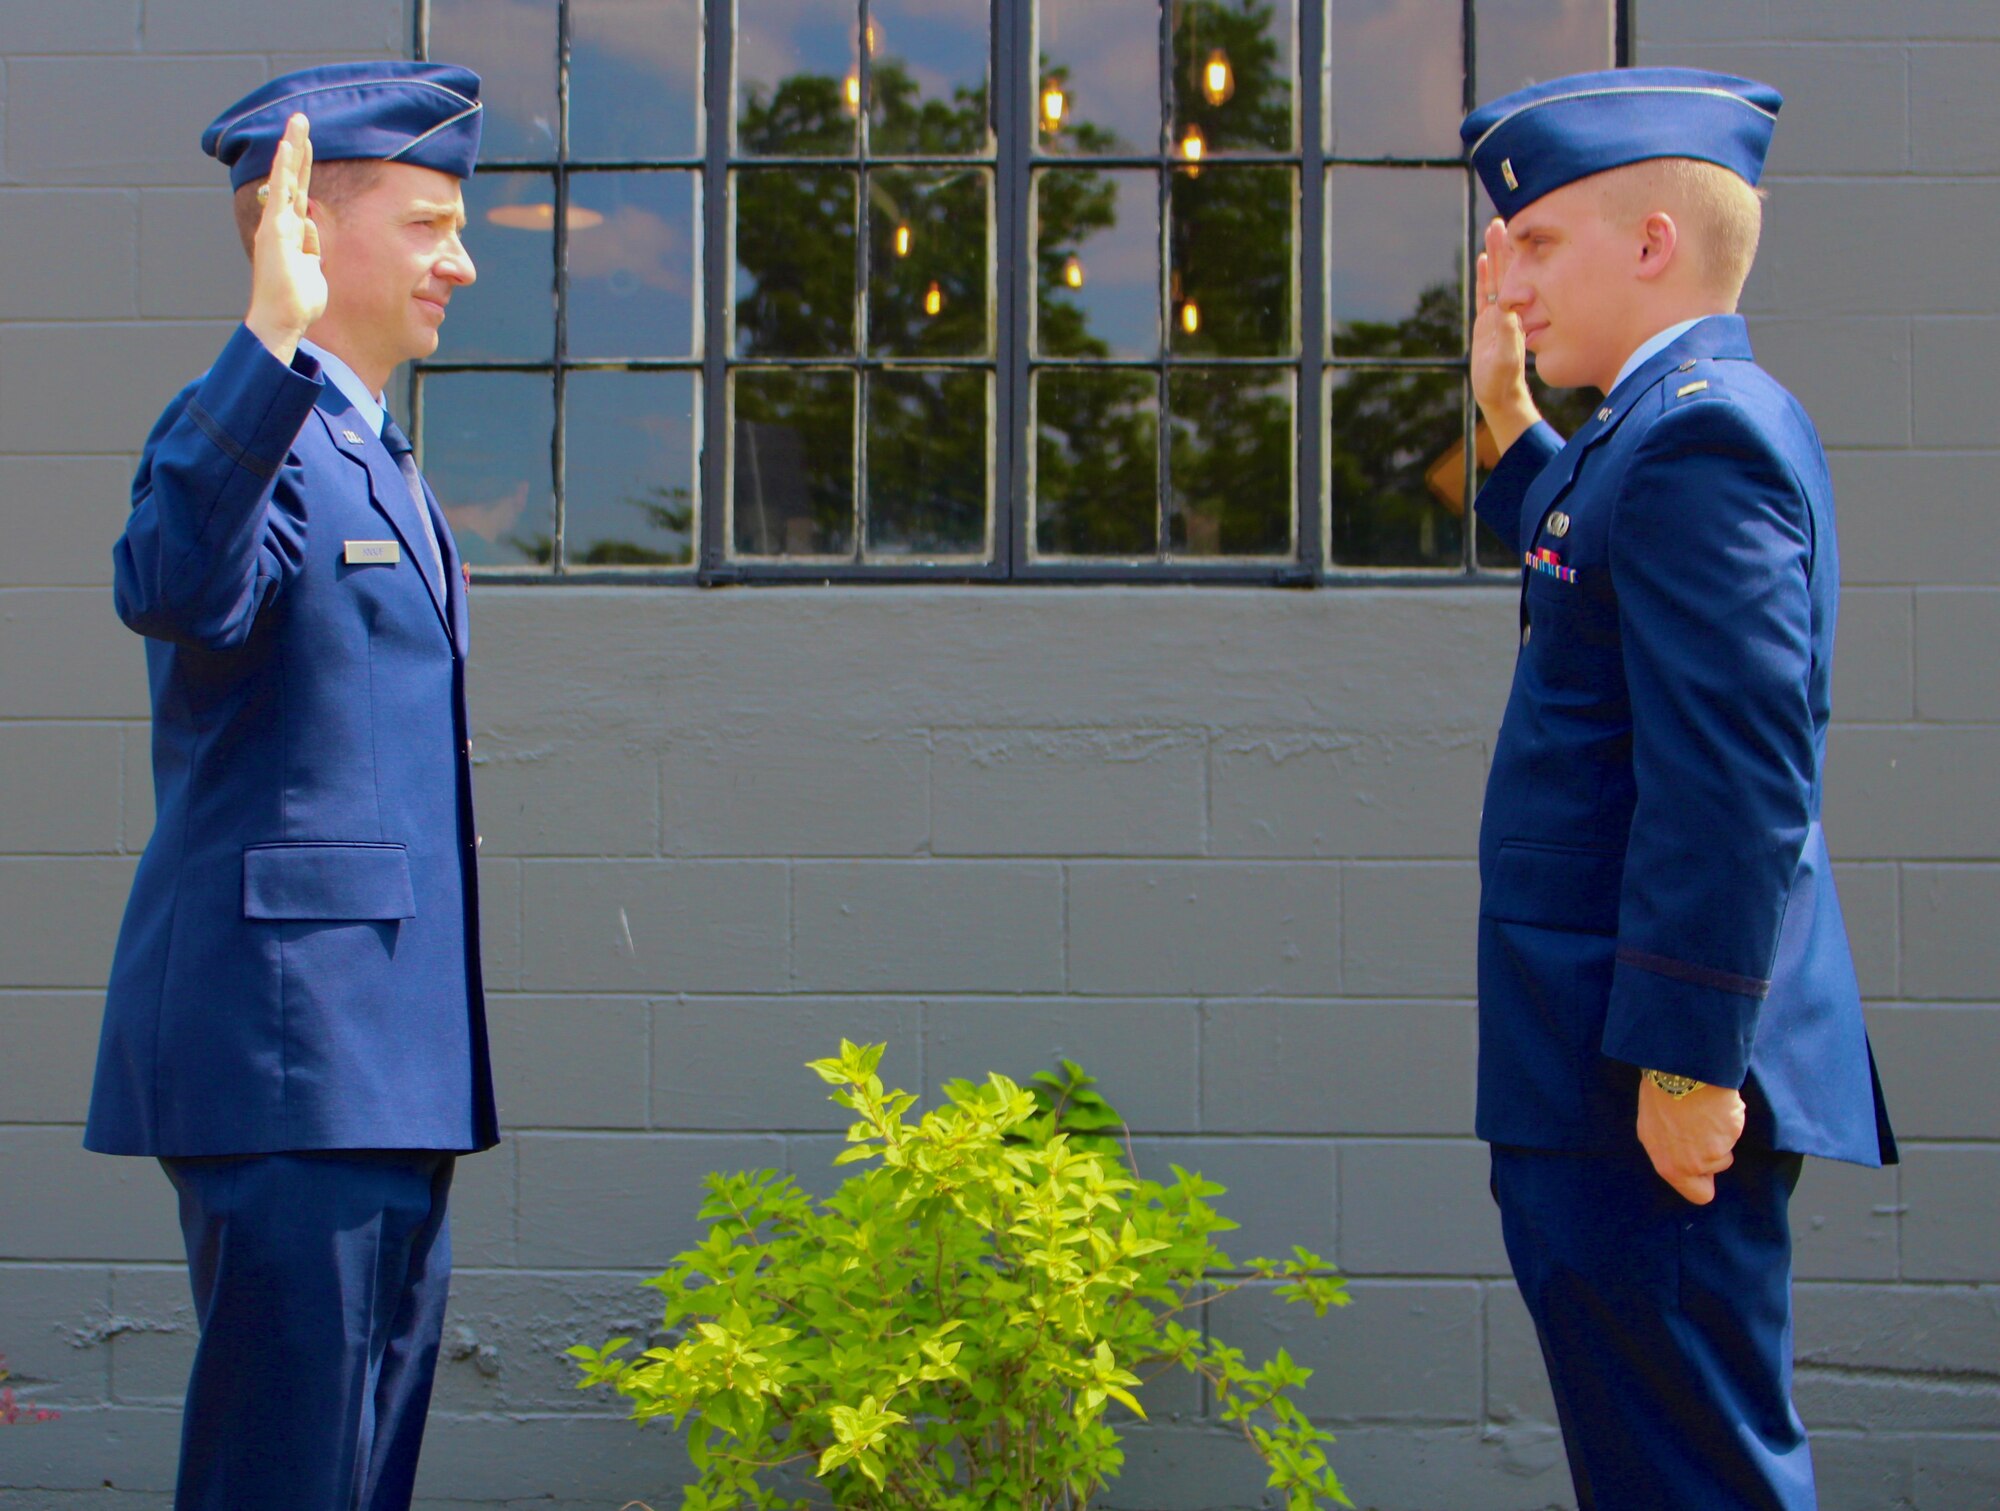 Lt. Col. Michael Knauf, left, administers the oath of office to newly-promoted 1st Lt. Ryan Blount during a promotion ceremony May 25, 2021, in Manchester, Tenn. (Courtesy photo)